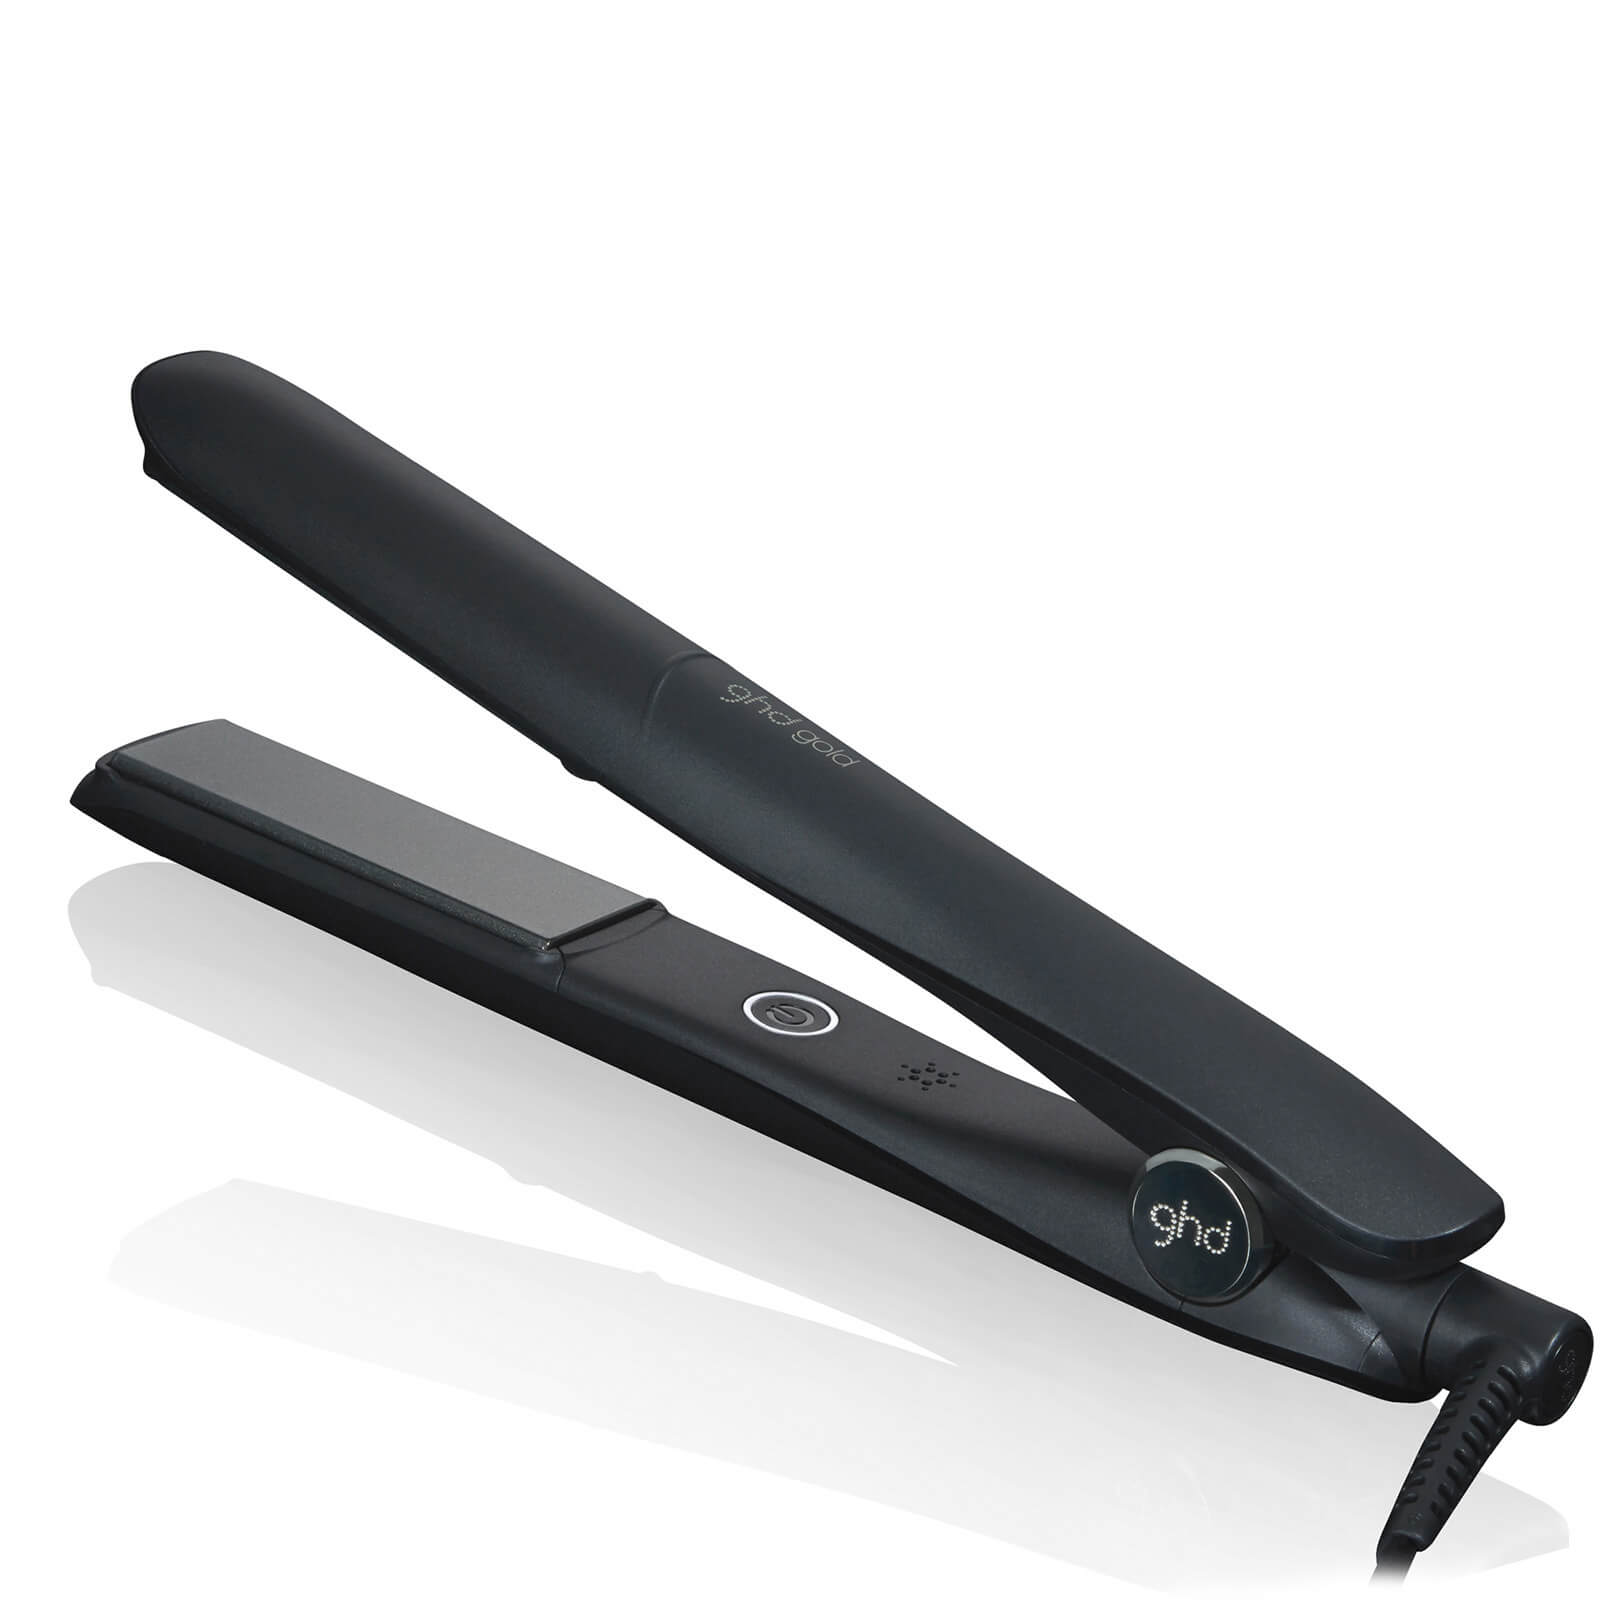 GHD Chronos UK: Everything you need to know - mamabella